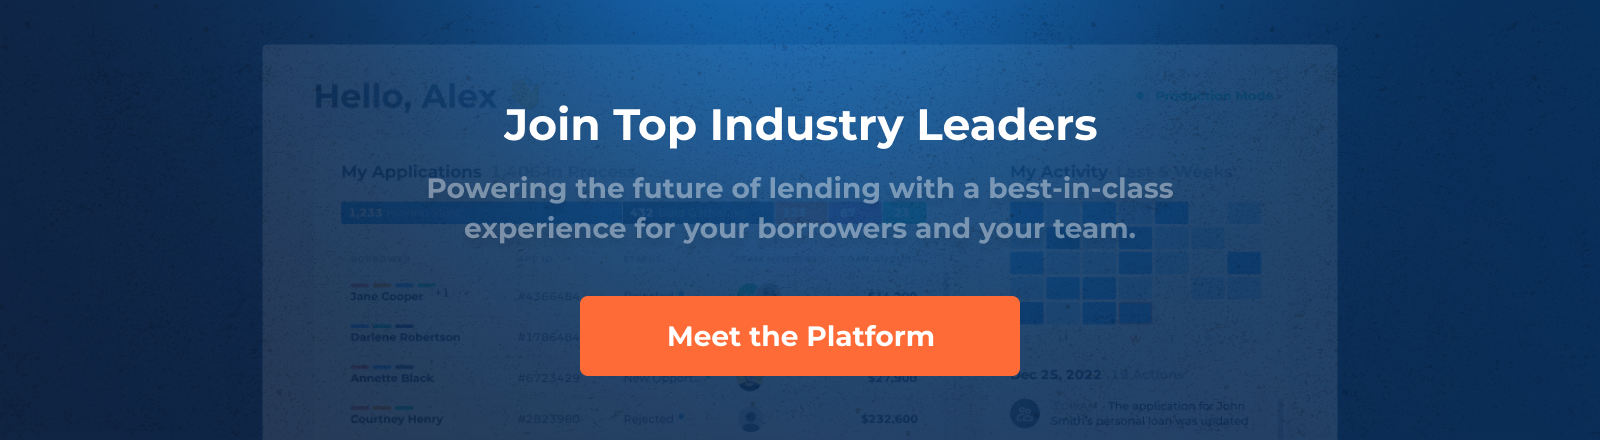 Join Top Industry Leaders